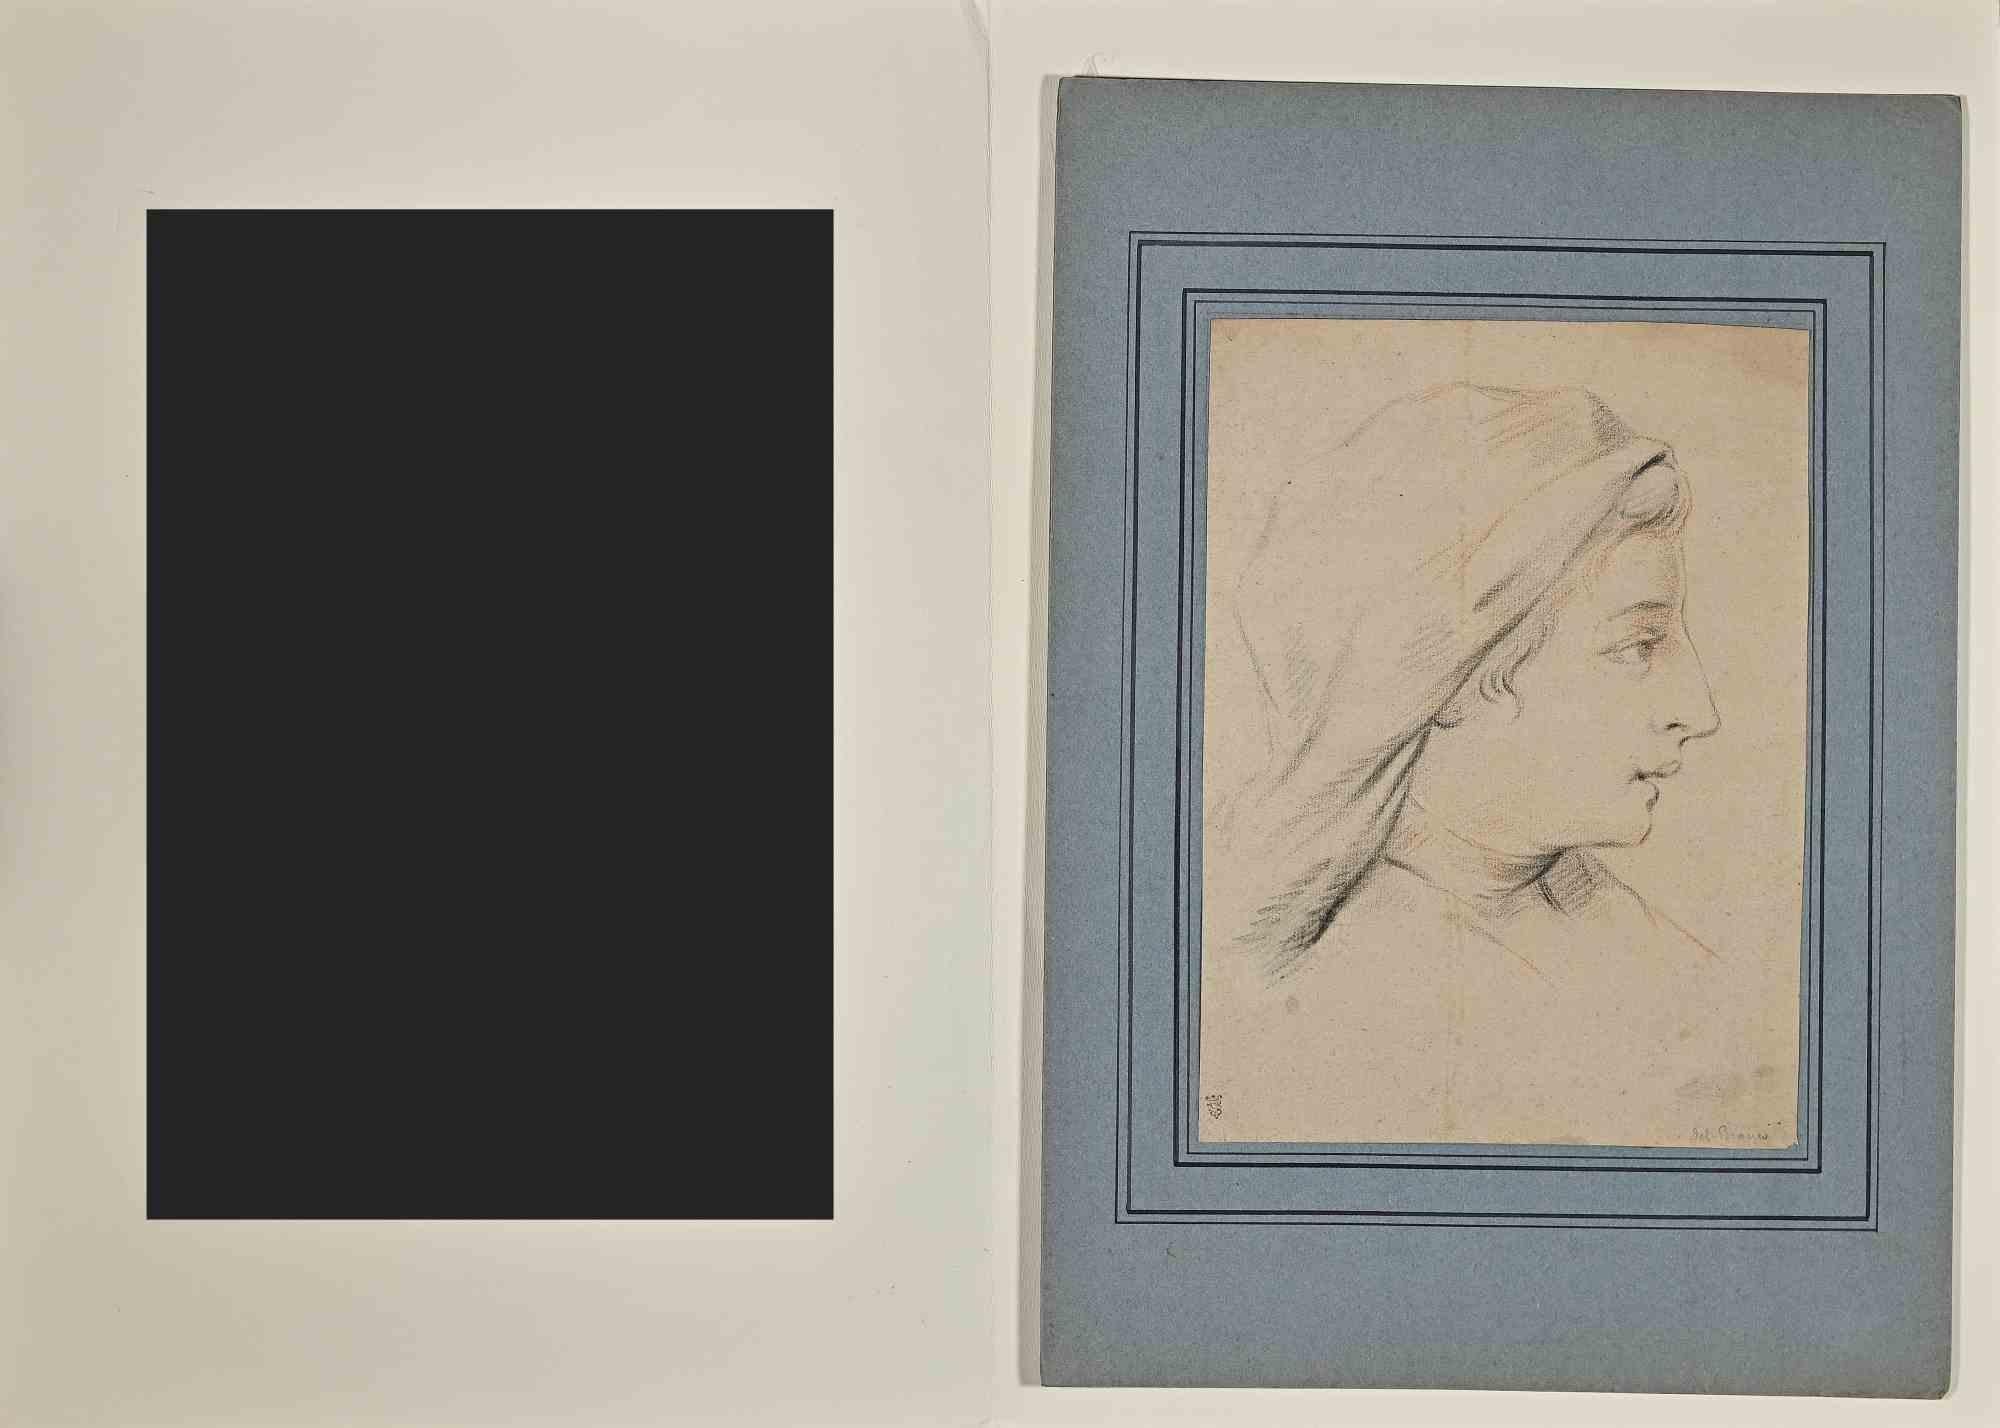 Portrait is a Pencil Drawing realized by an Italian artist of 17th and early 18th century, after Baccio del Bianco (1604-1656).

Good condition on a yellowed paper included a blue and cream colored cardboard passpartout (50x35 cm).

Hand signed by